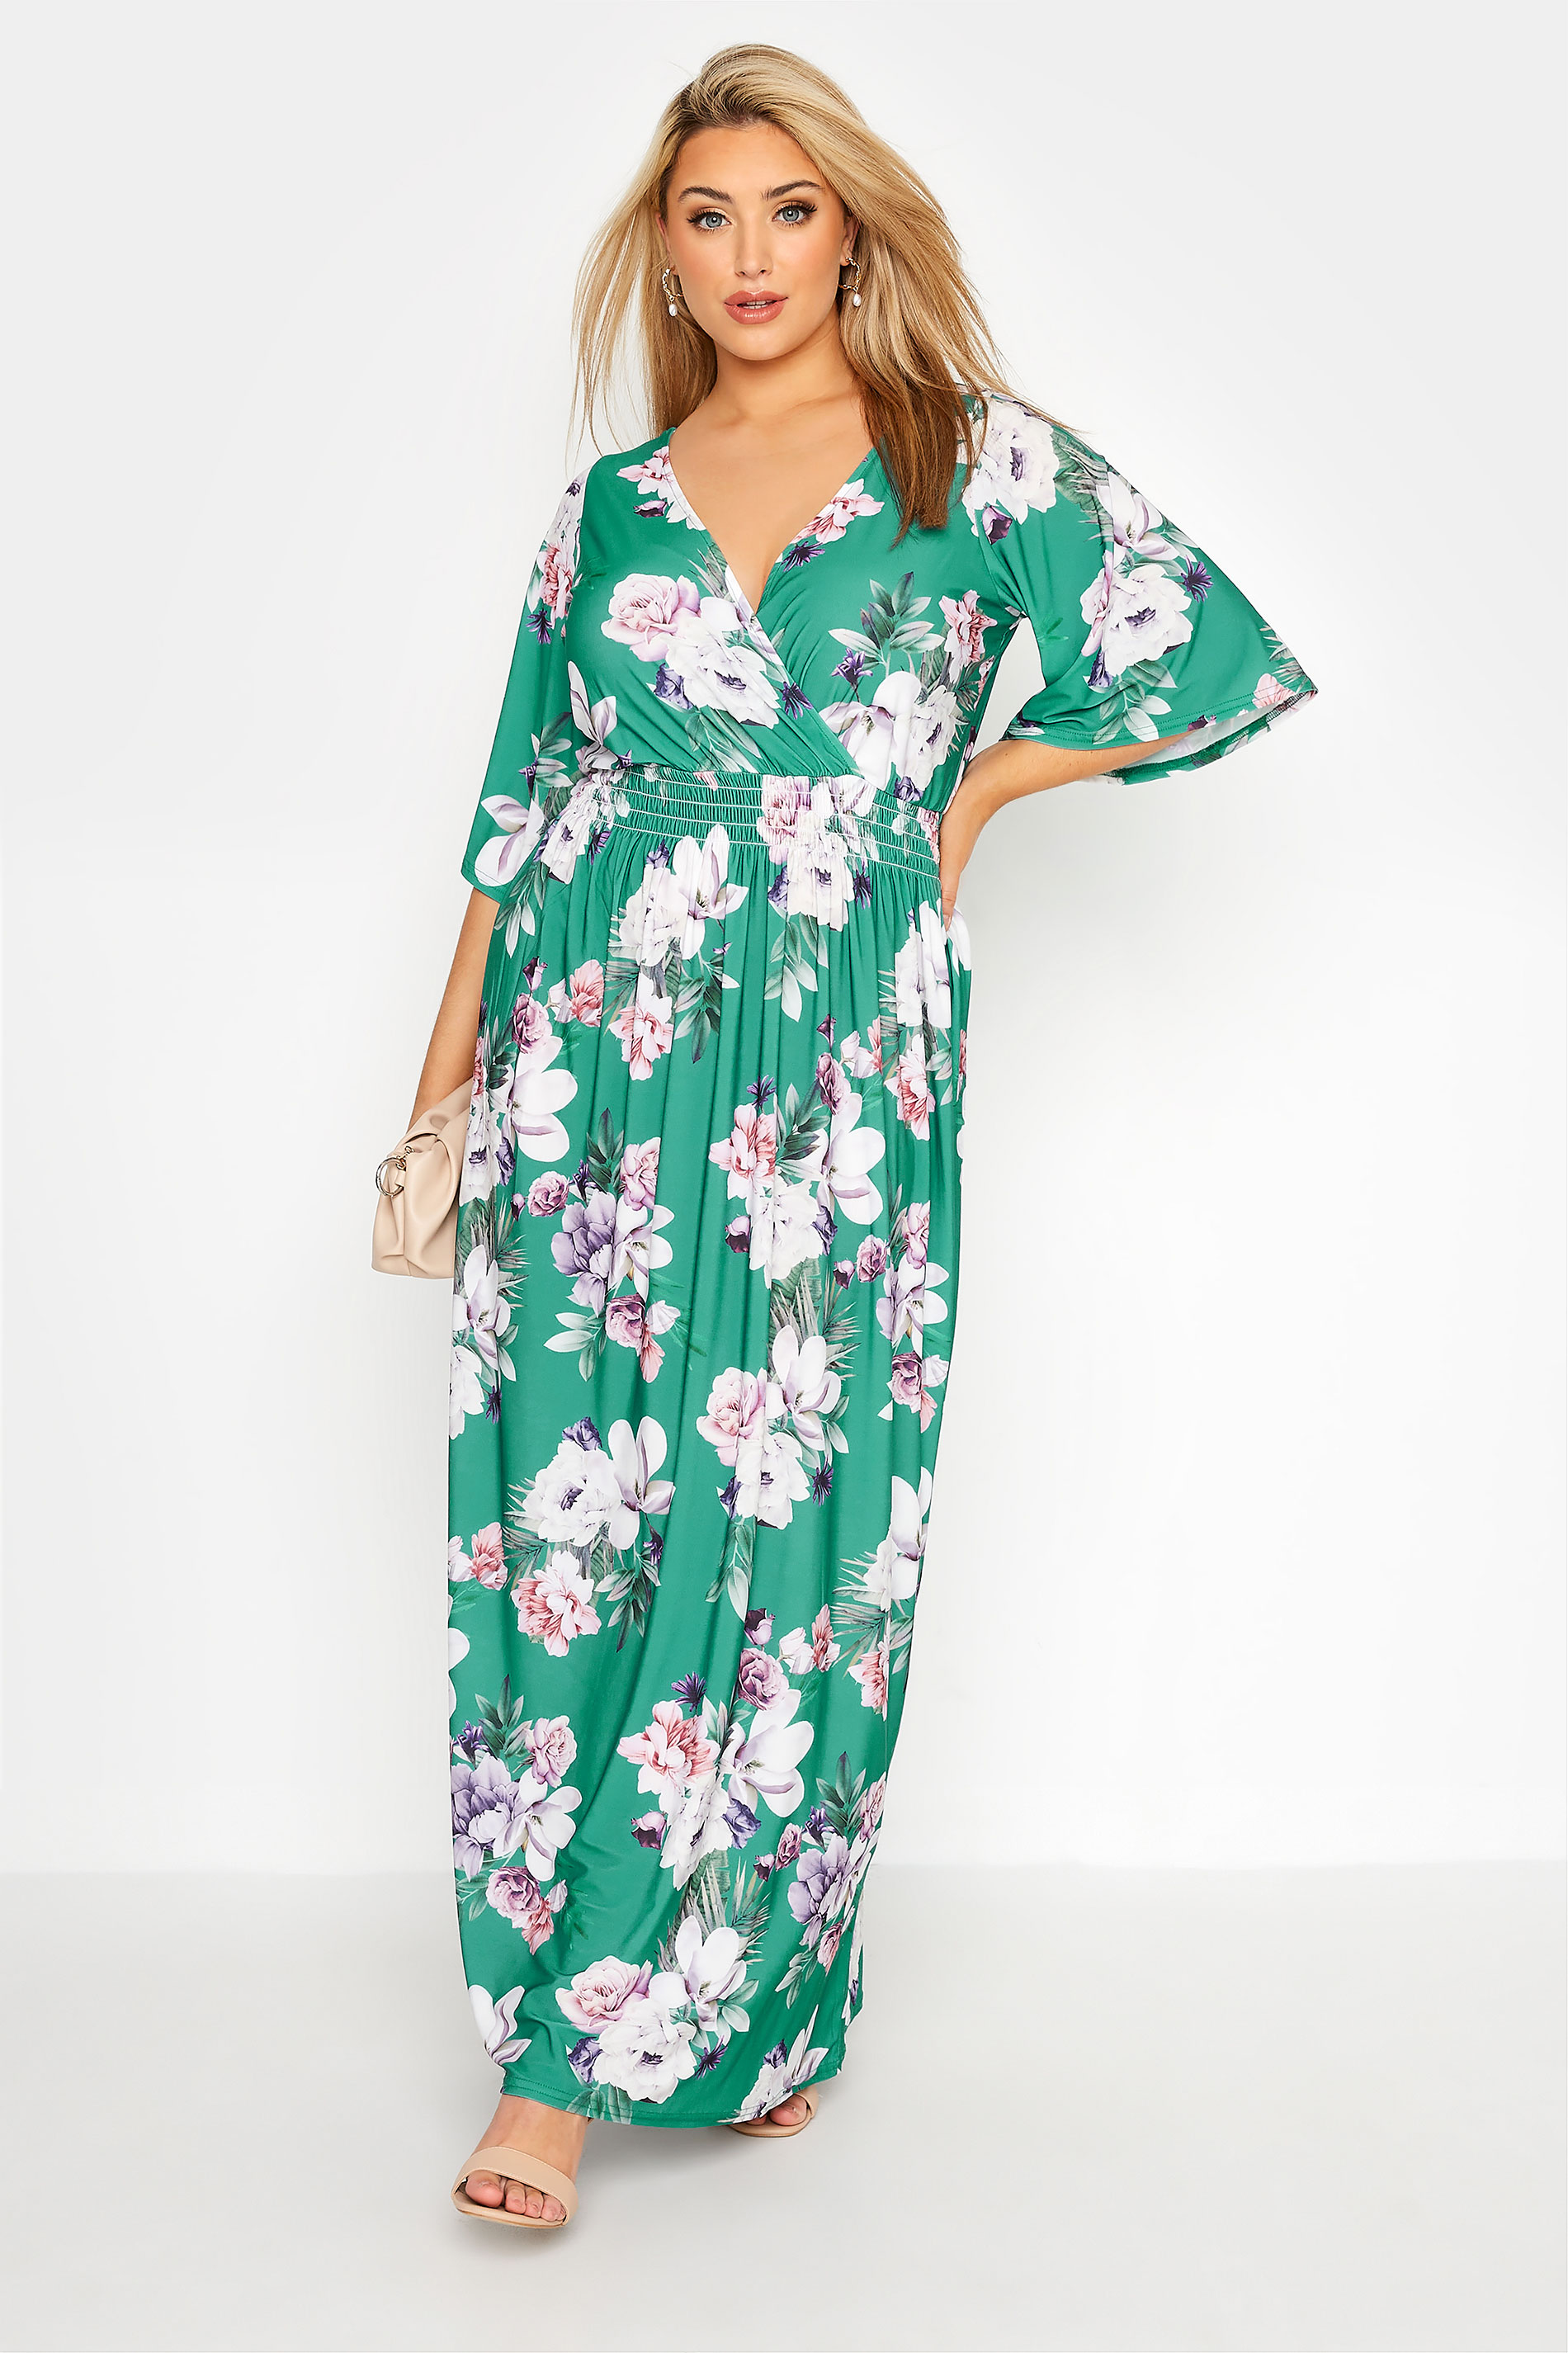 Robes Grande Taille Grande taille  Robes Longues | YOURS LONDON - Robe Cache-Coeur Floral Verte Maxi - UM21685